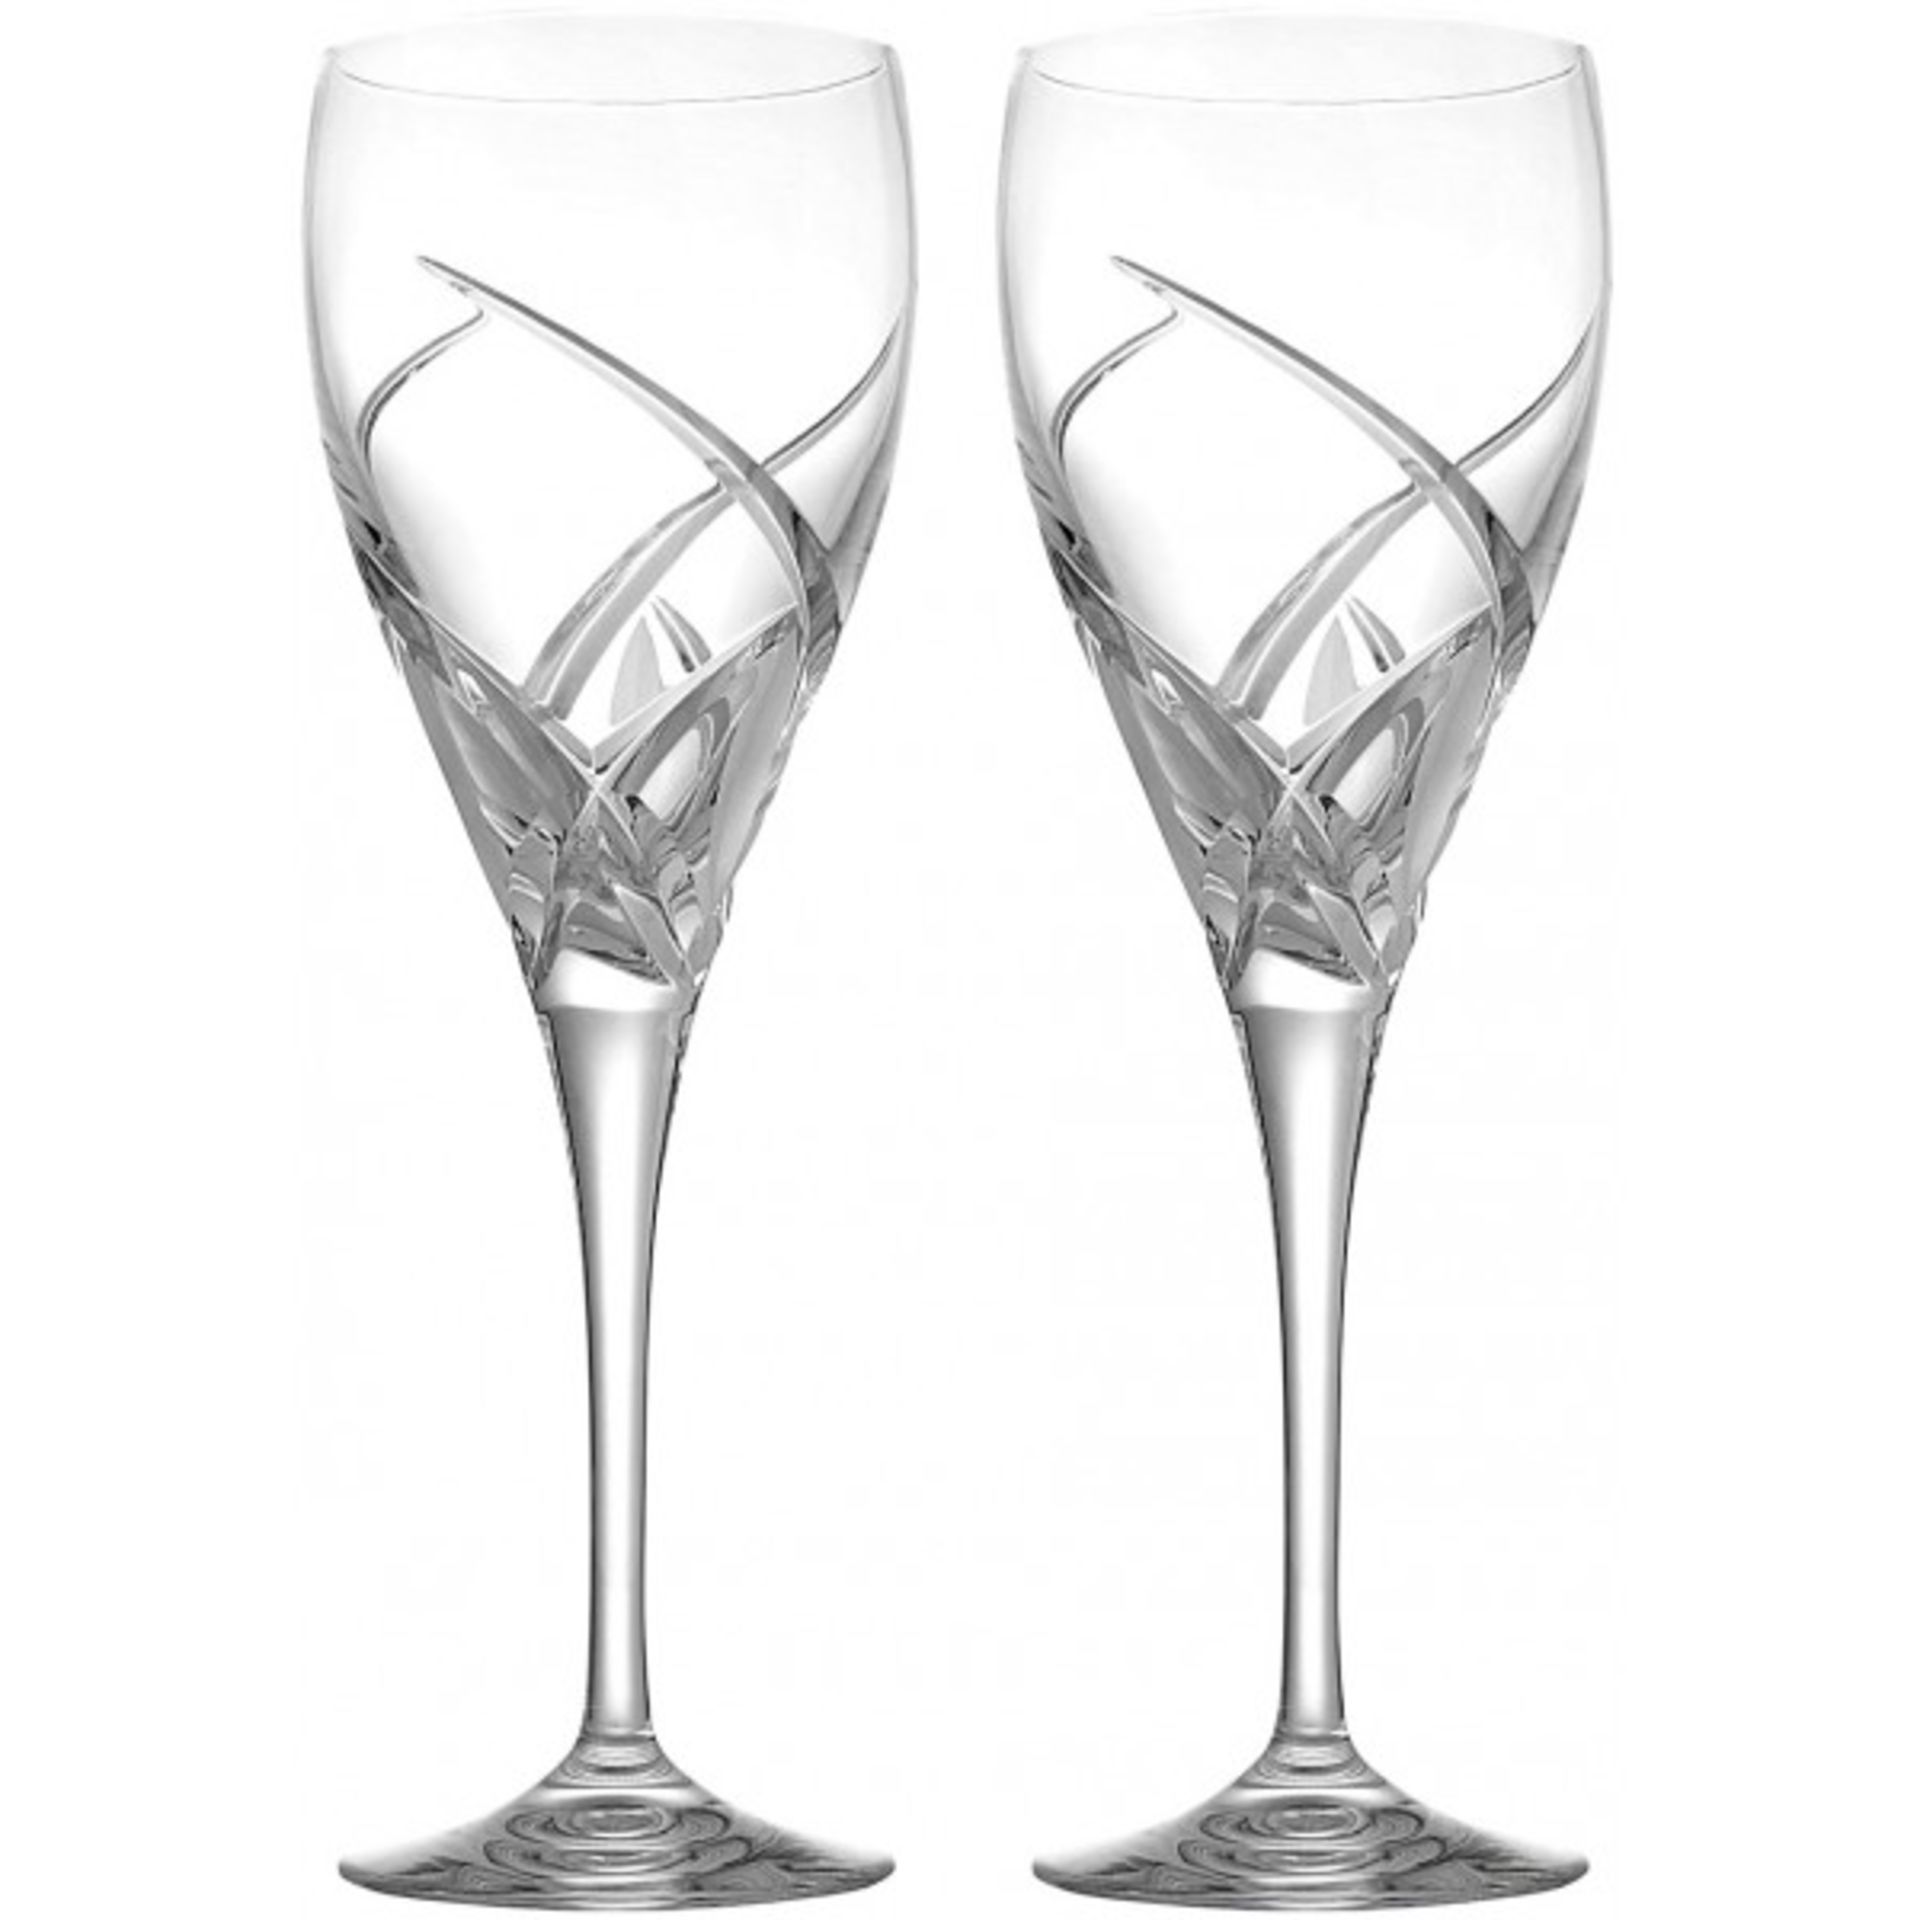 + VAT Brand New Boxed Set (Two) Of RCR Cristalleria Italiana Twist Red Wine Glasses 33cl - Made In